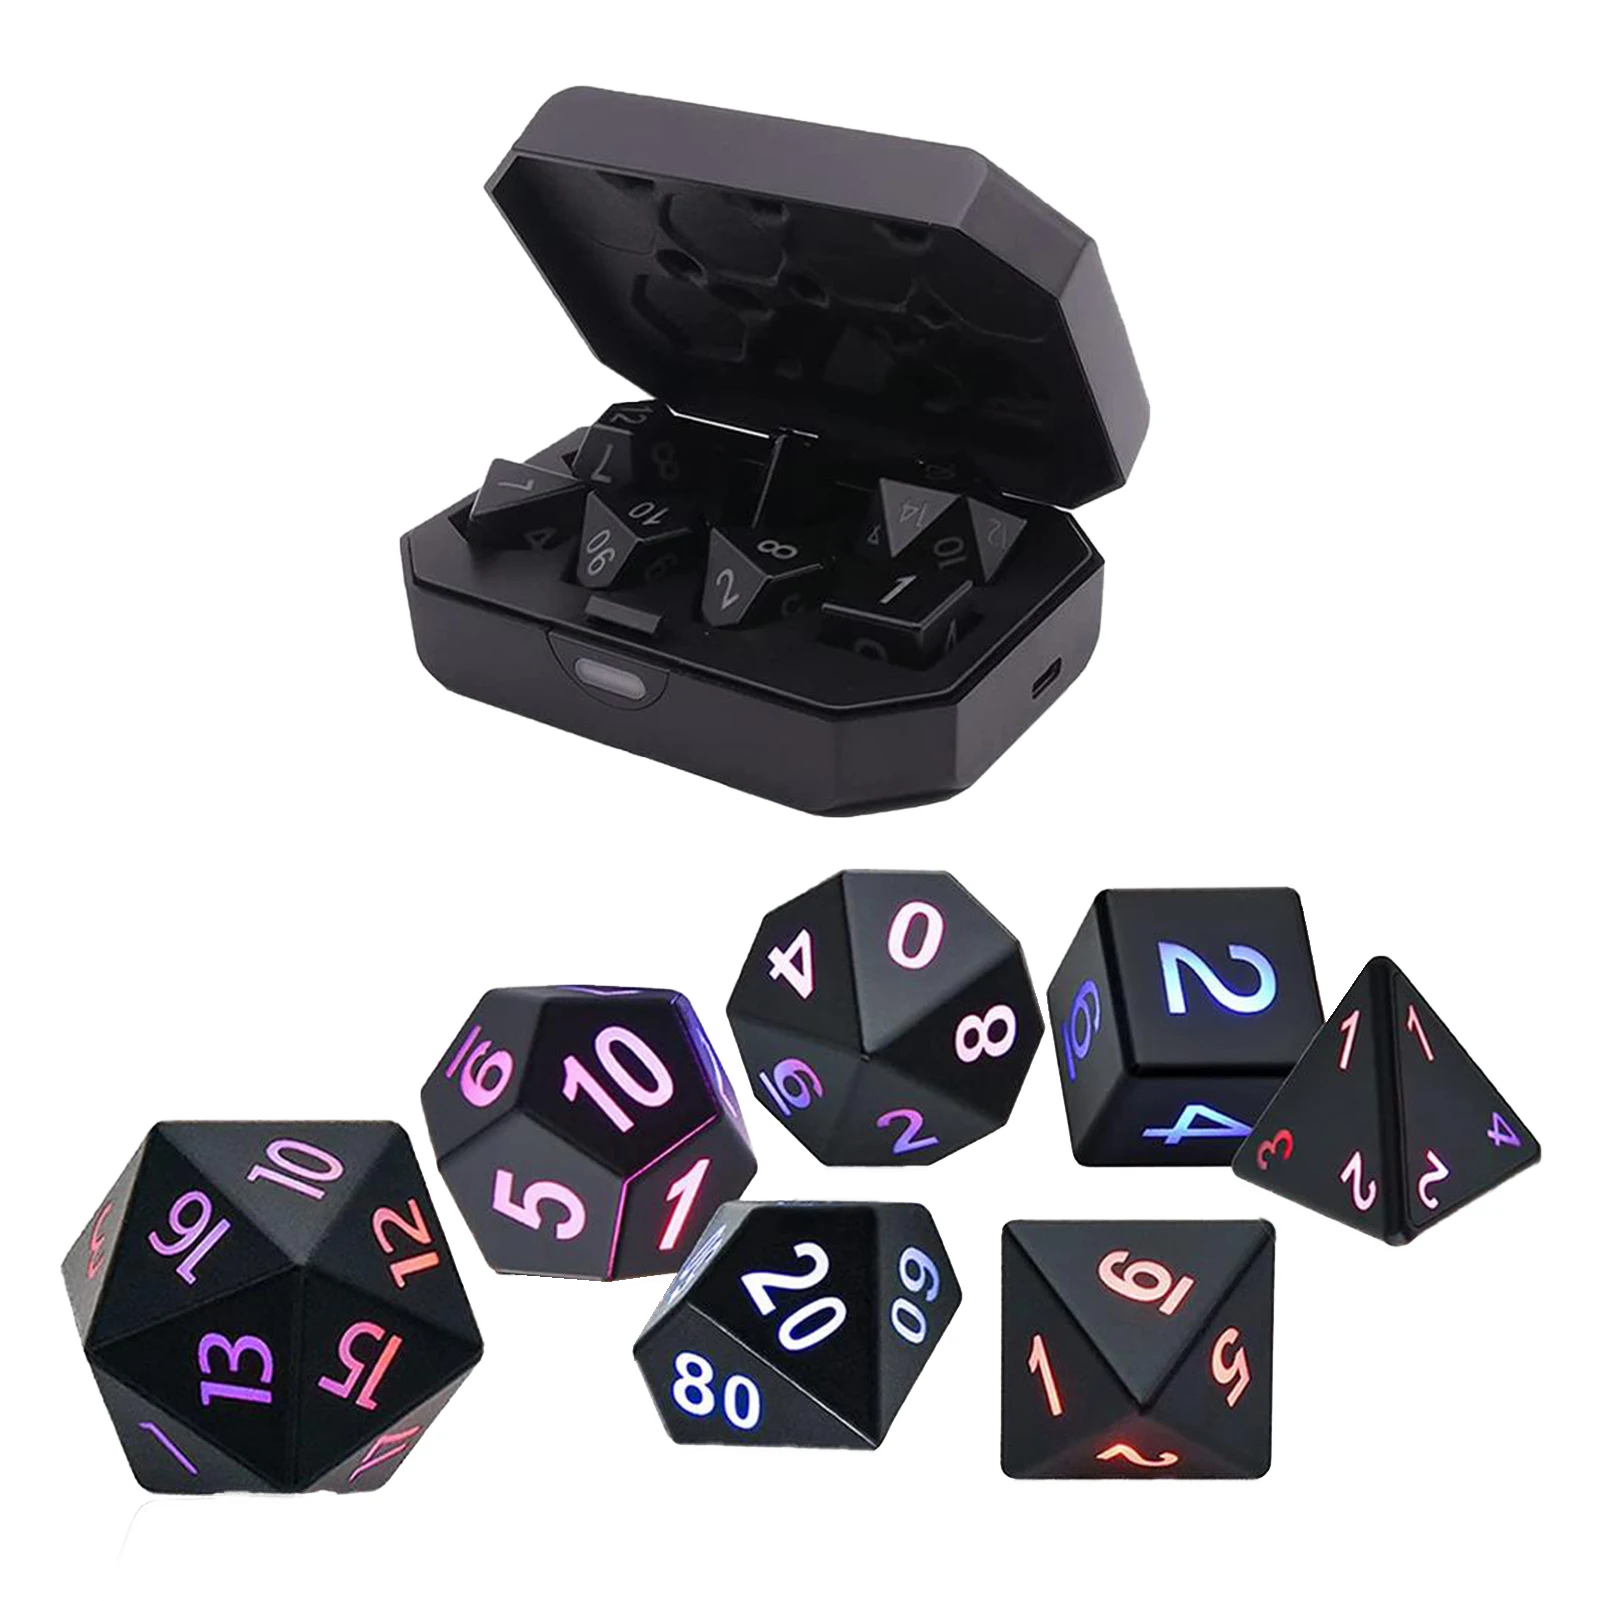 

7pcs DND Dice Set Electronic Dice With Charging Box 7pcs LED Dice Set For Tabletop Games ZHOORQI D&D Dice Role Playing Game